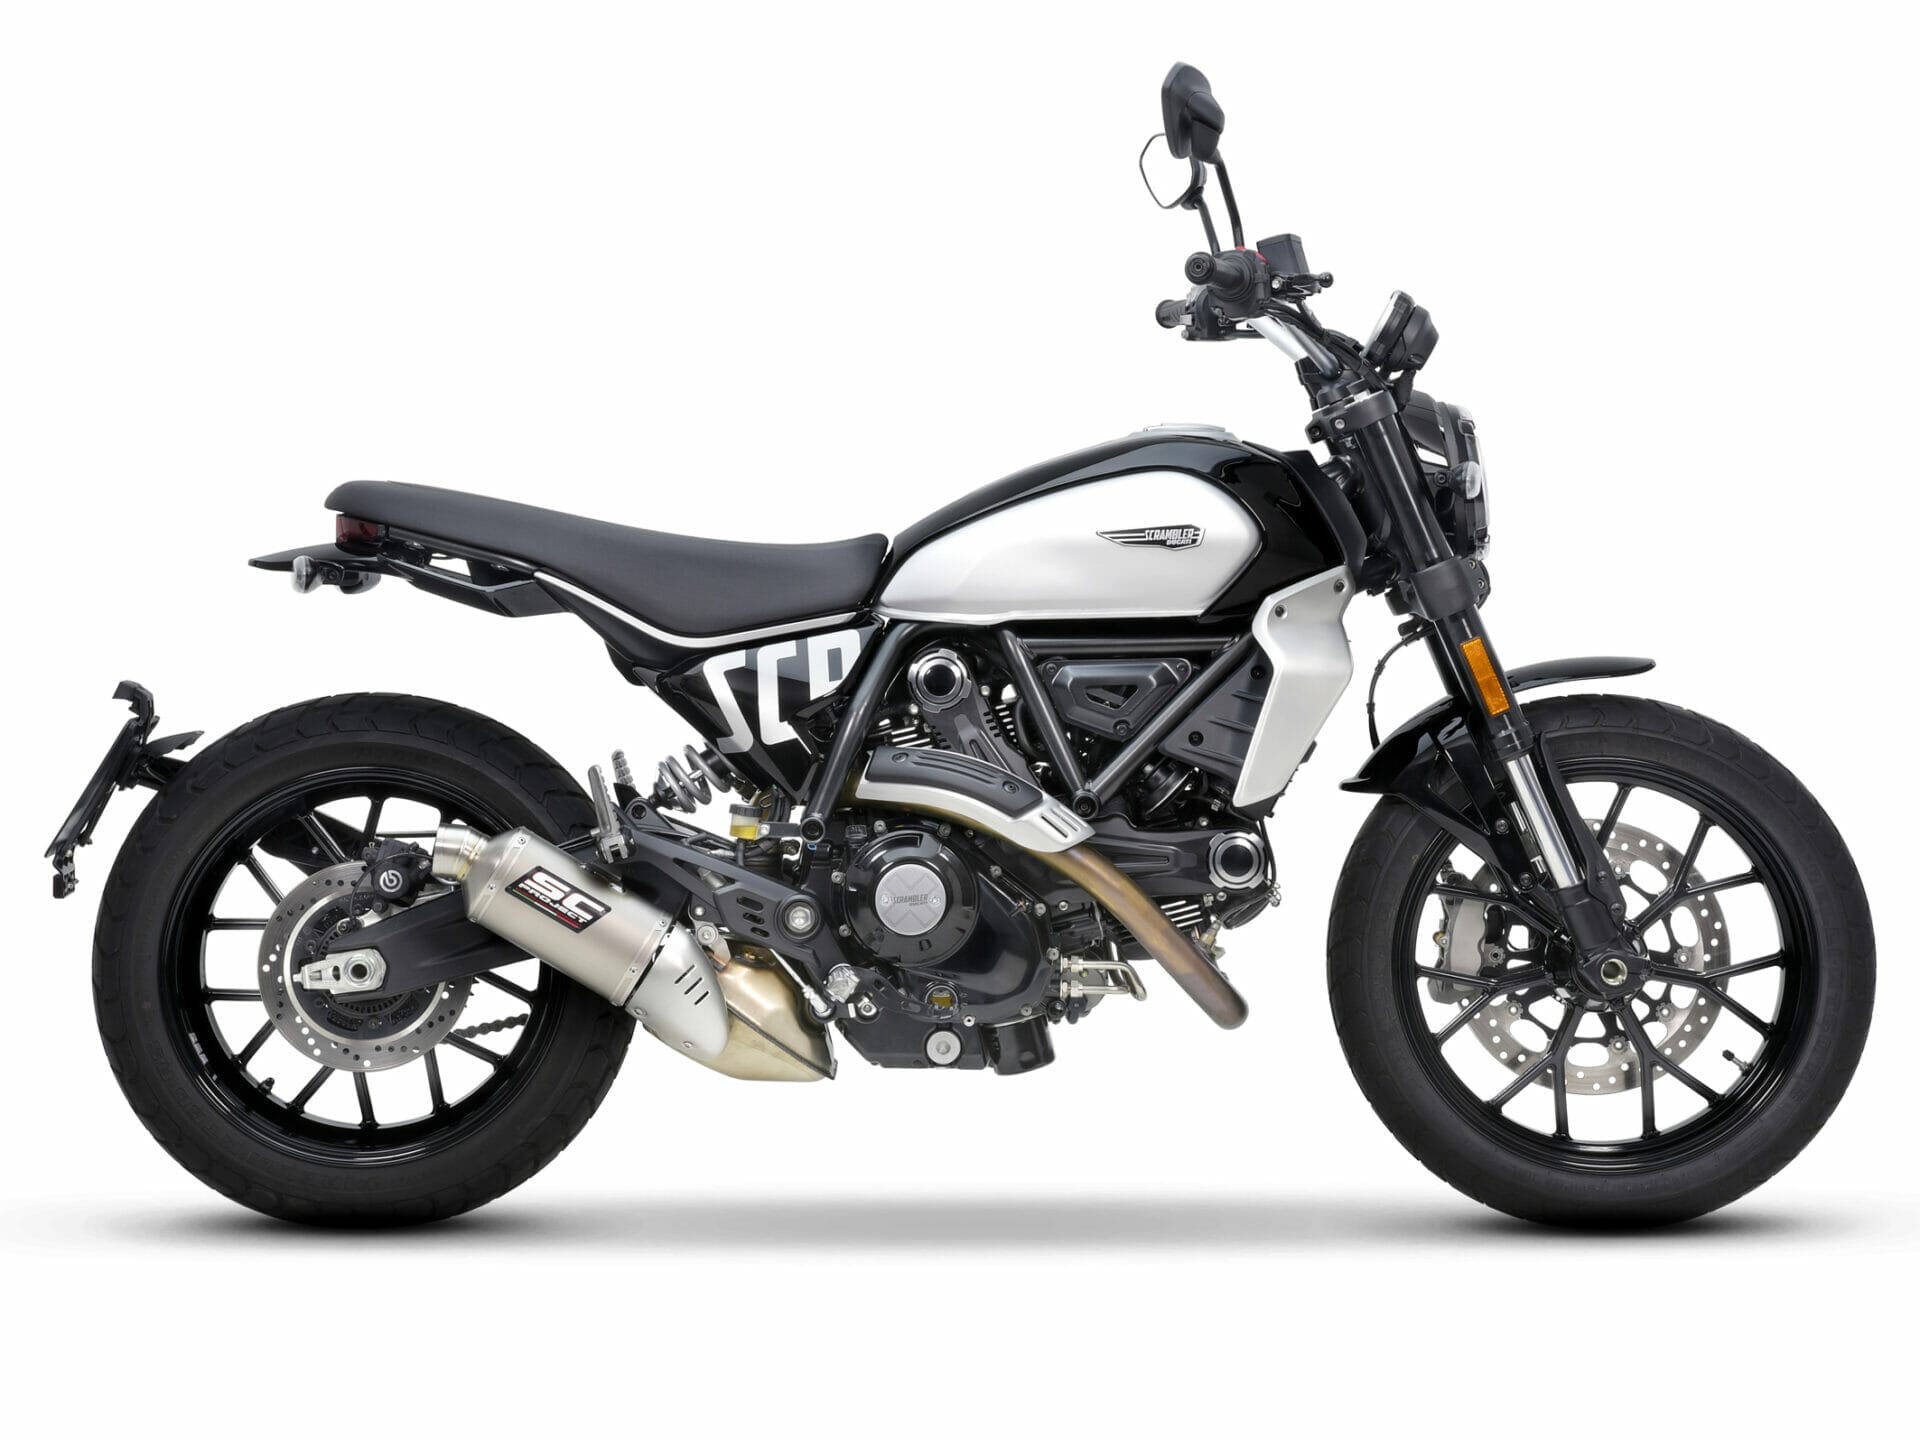 SC-Project unveils three new mufflers for the 2023 Ducati Scrambler 800.